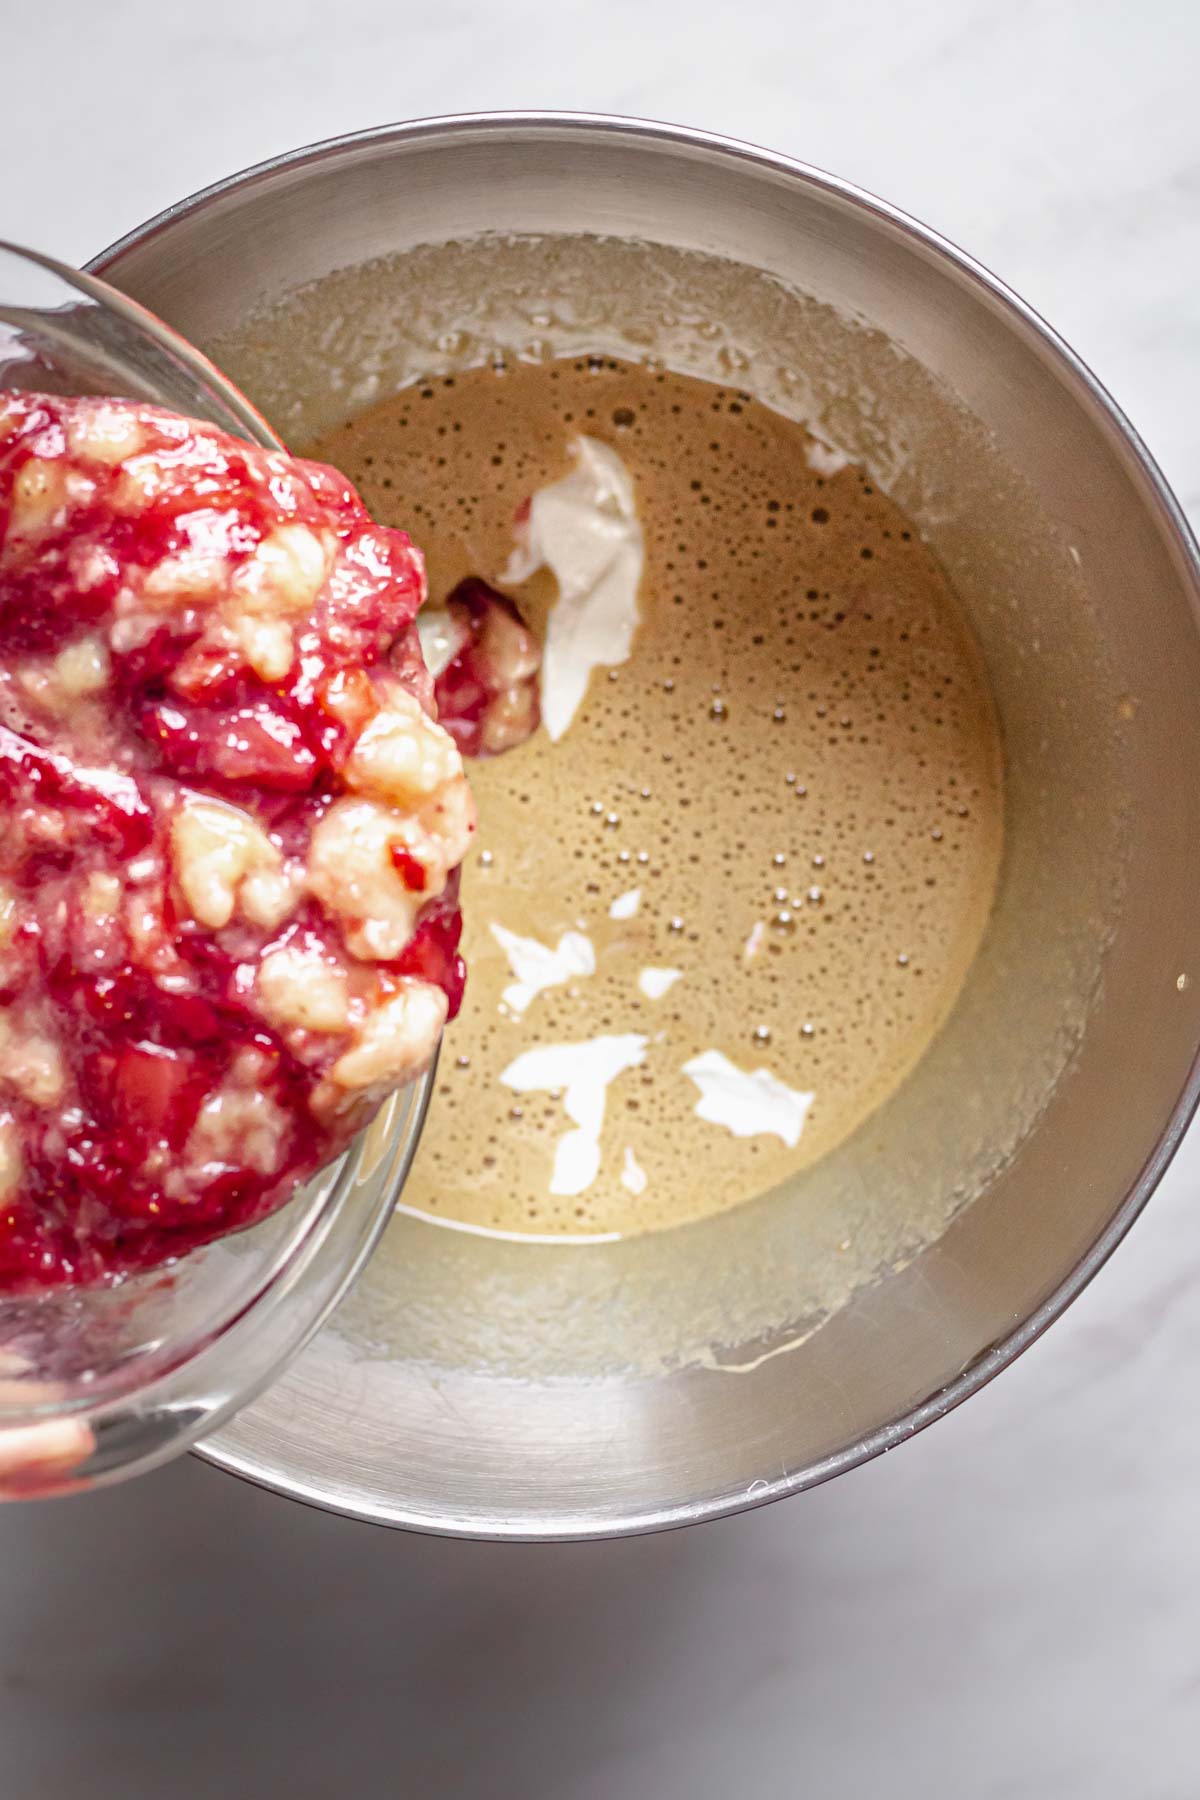 Mashed strawberries and bananas pouring into cake batter.